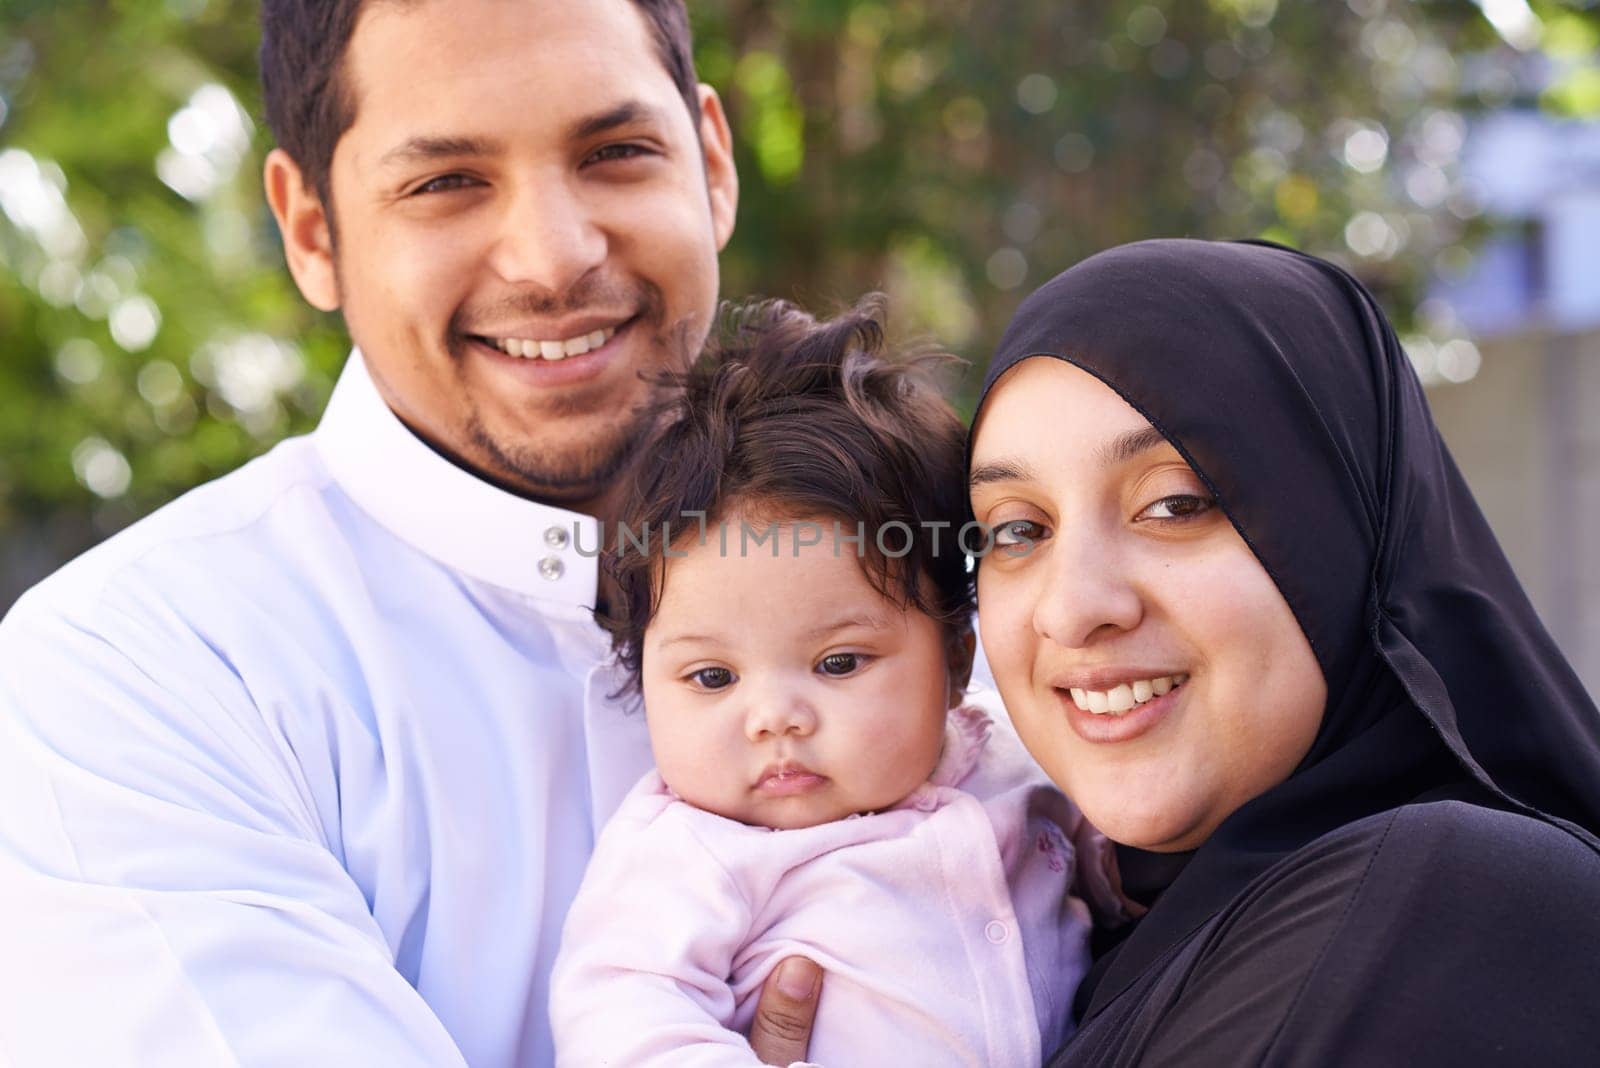 Muslim, family and portrait of parents with baby in park for bonding, Ramadan and outdoors together. Islam, happy and mother, father and newborn infant for love, childcare or support in garden.